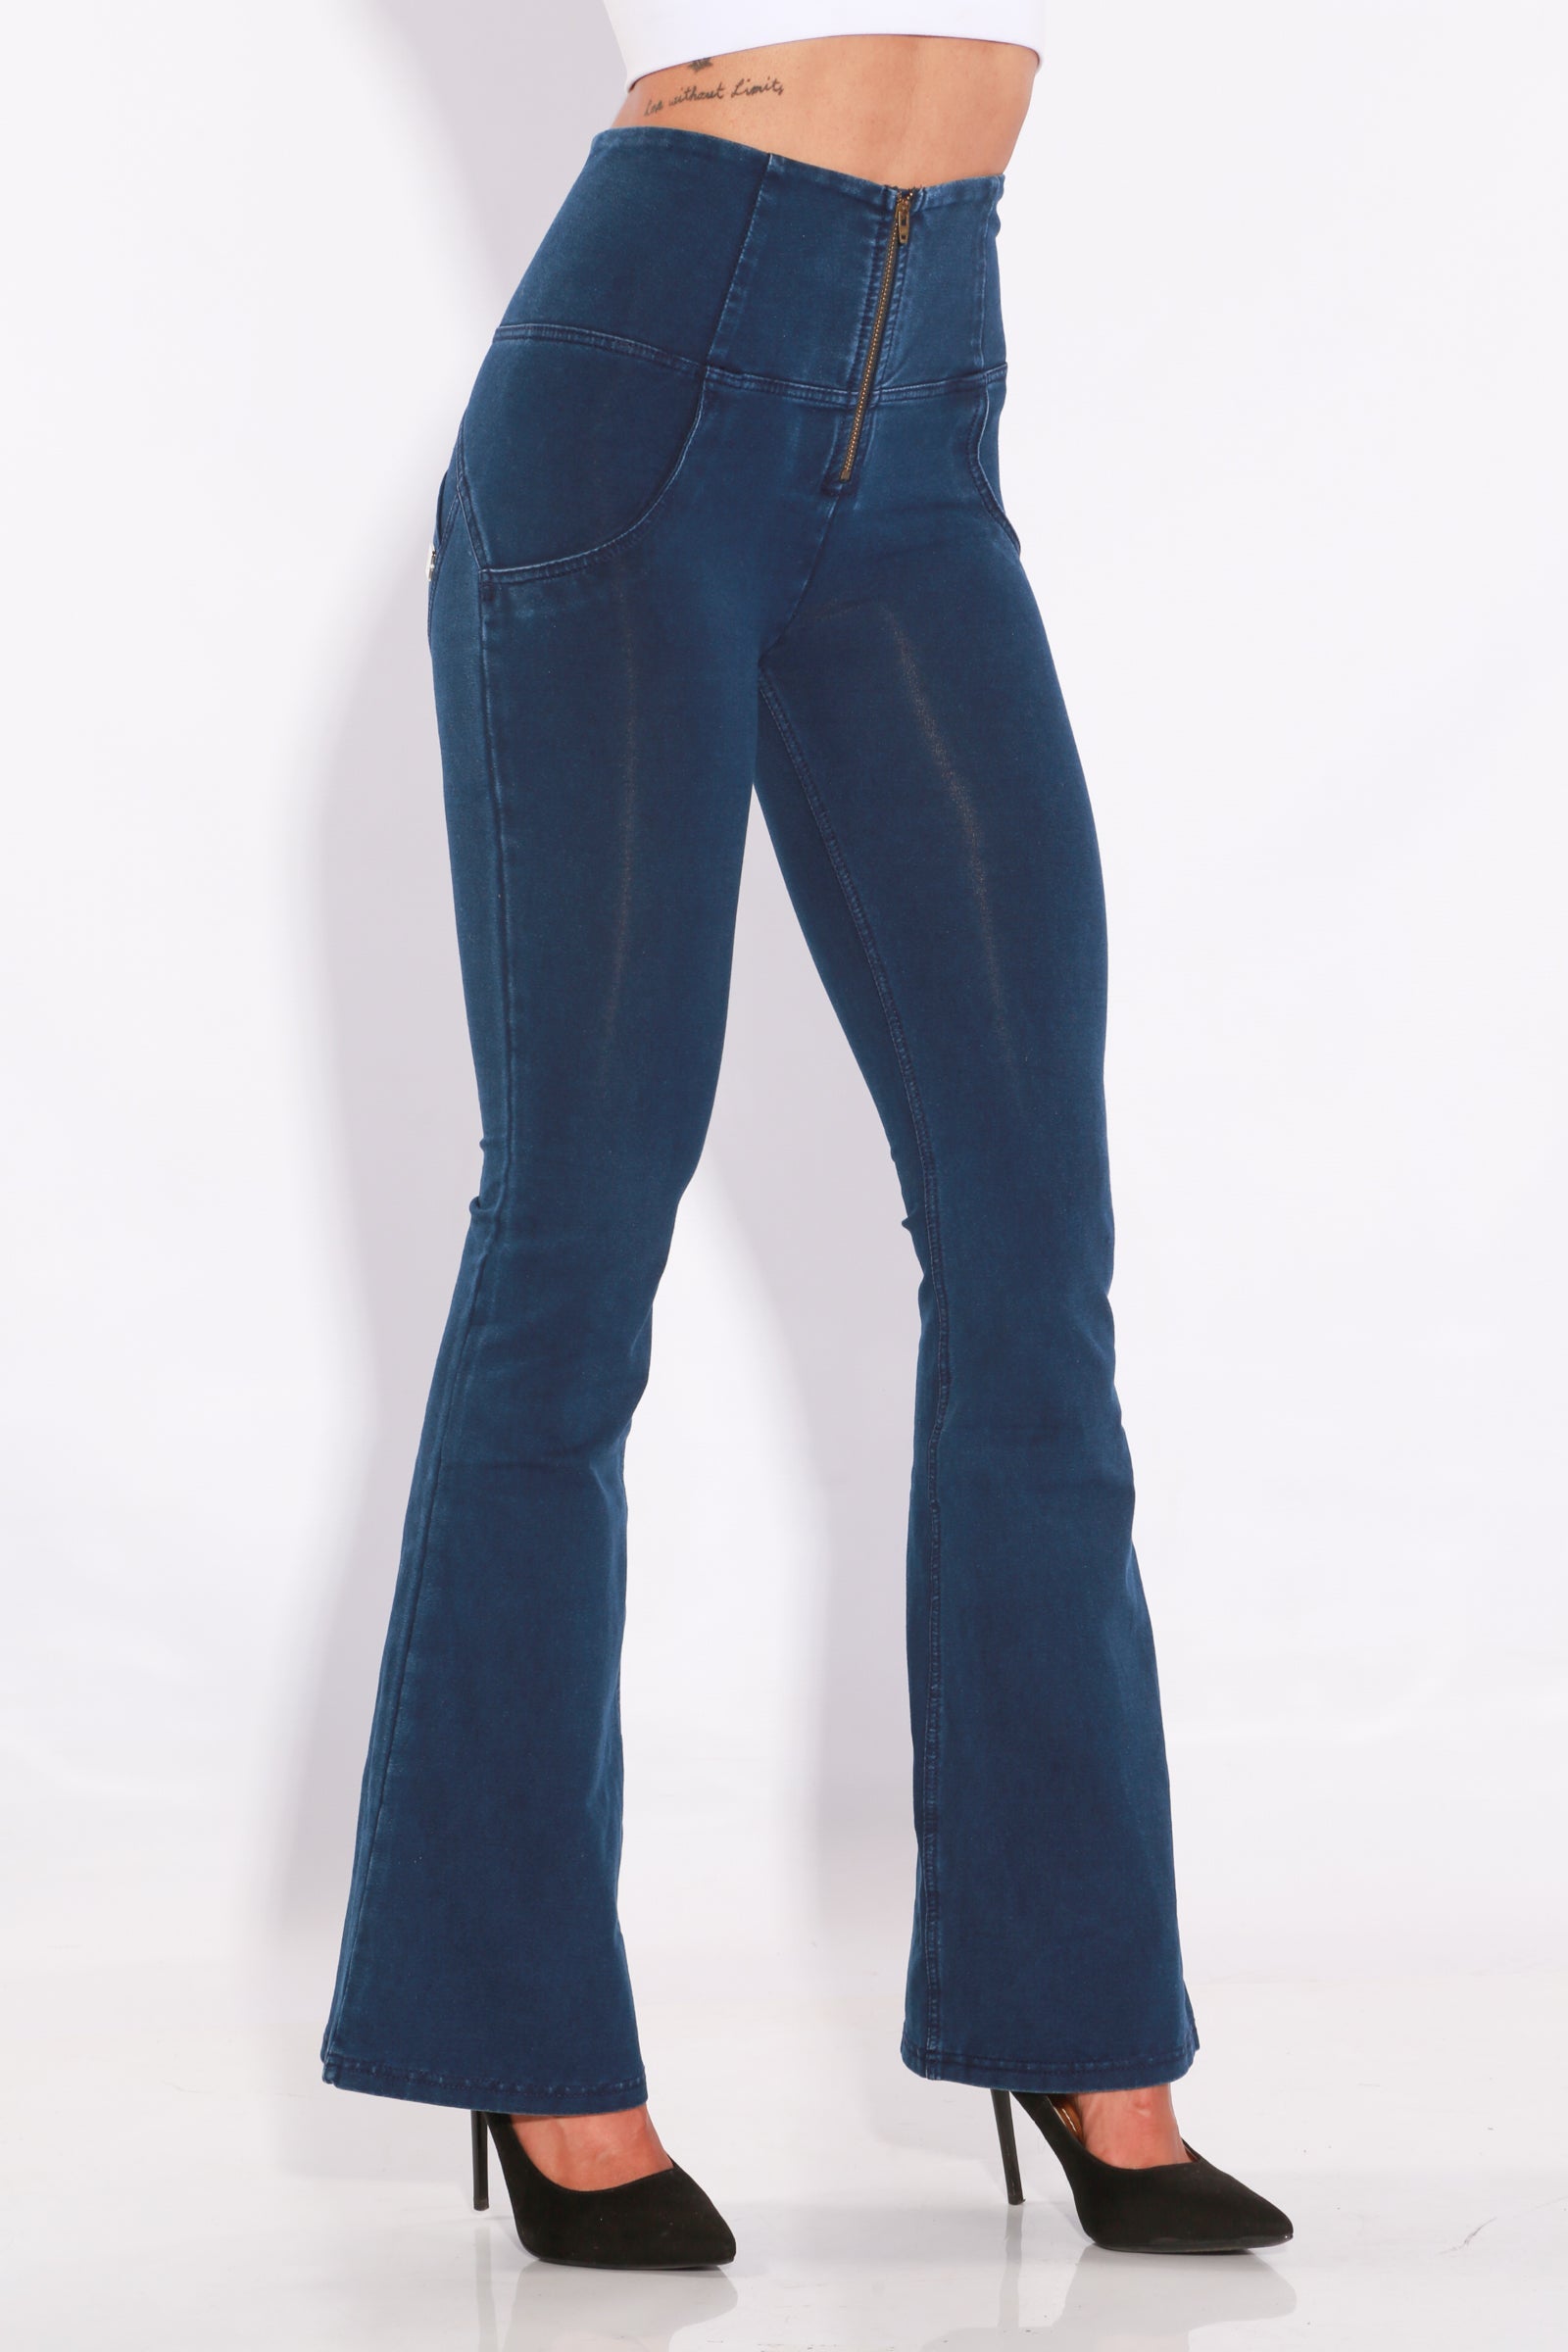 Image of High waist Bootleg Butt lifting Flare Shaping jeans/Jeggings - Dark Blue